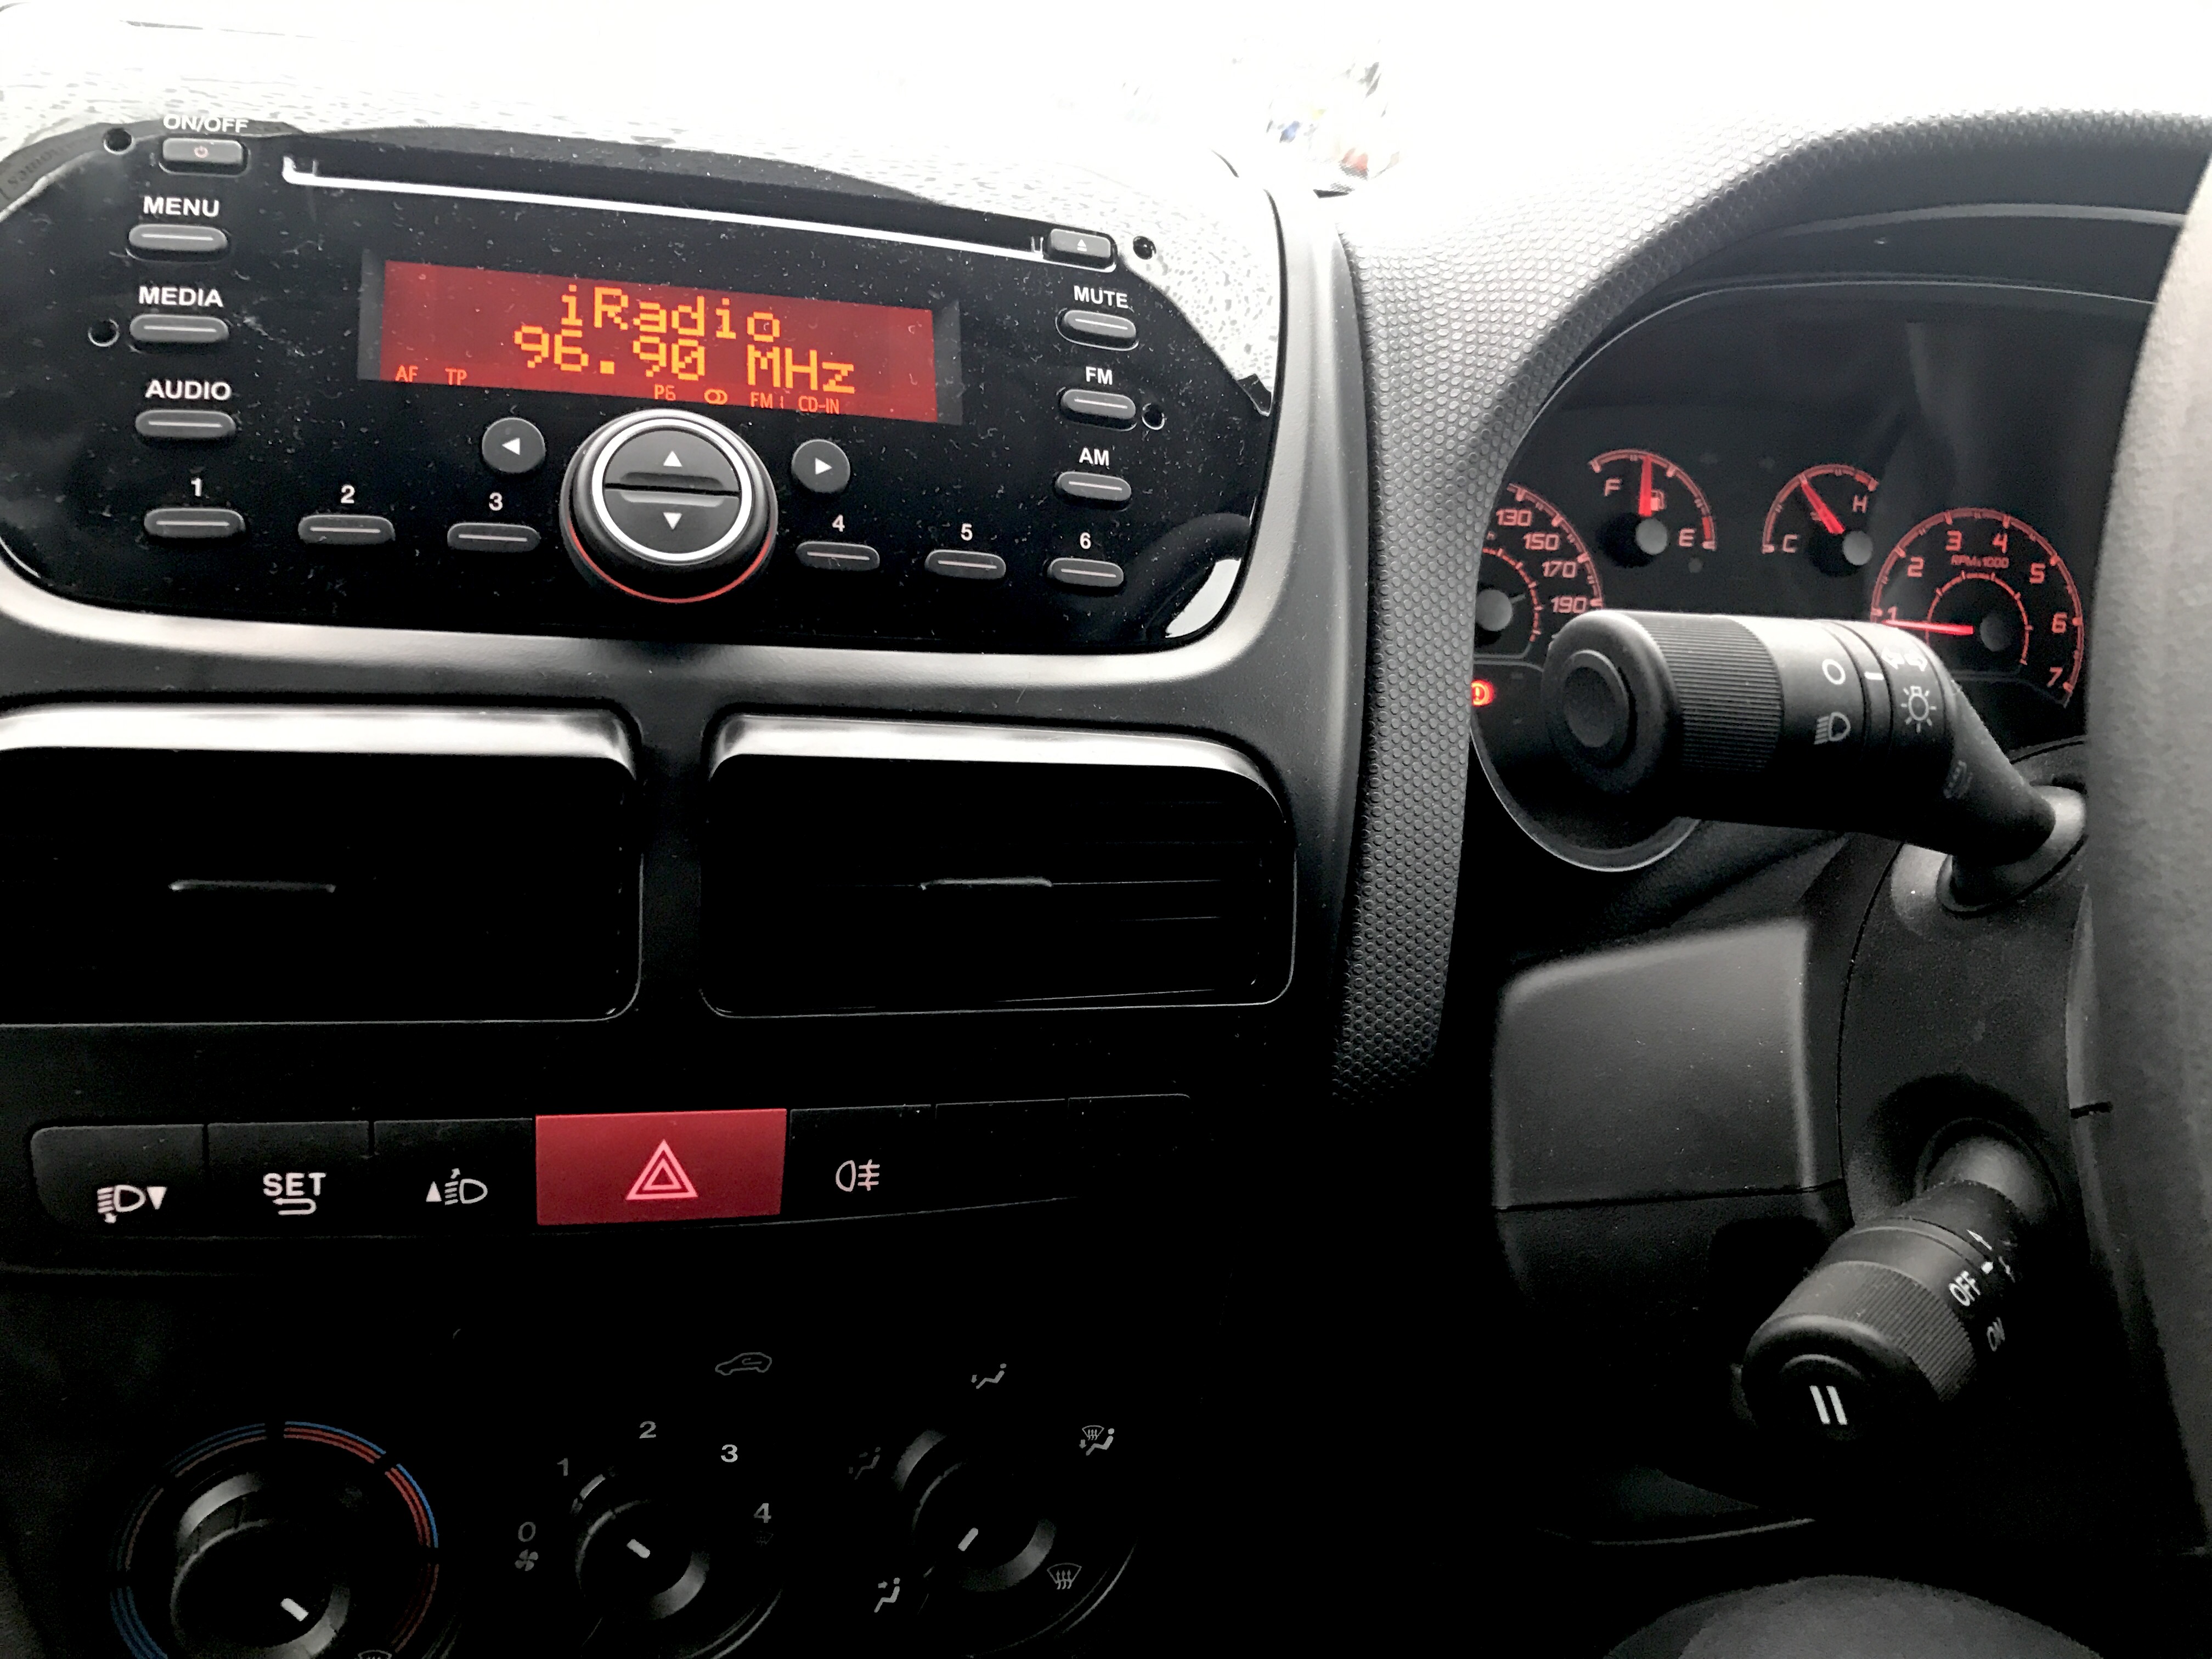 A view of the interior of the new Fiat Doblo complete with cruise control. Photo Brian McDaid